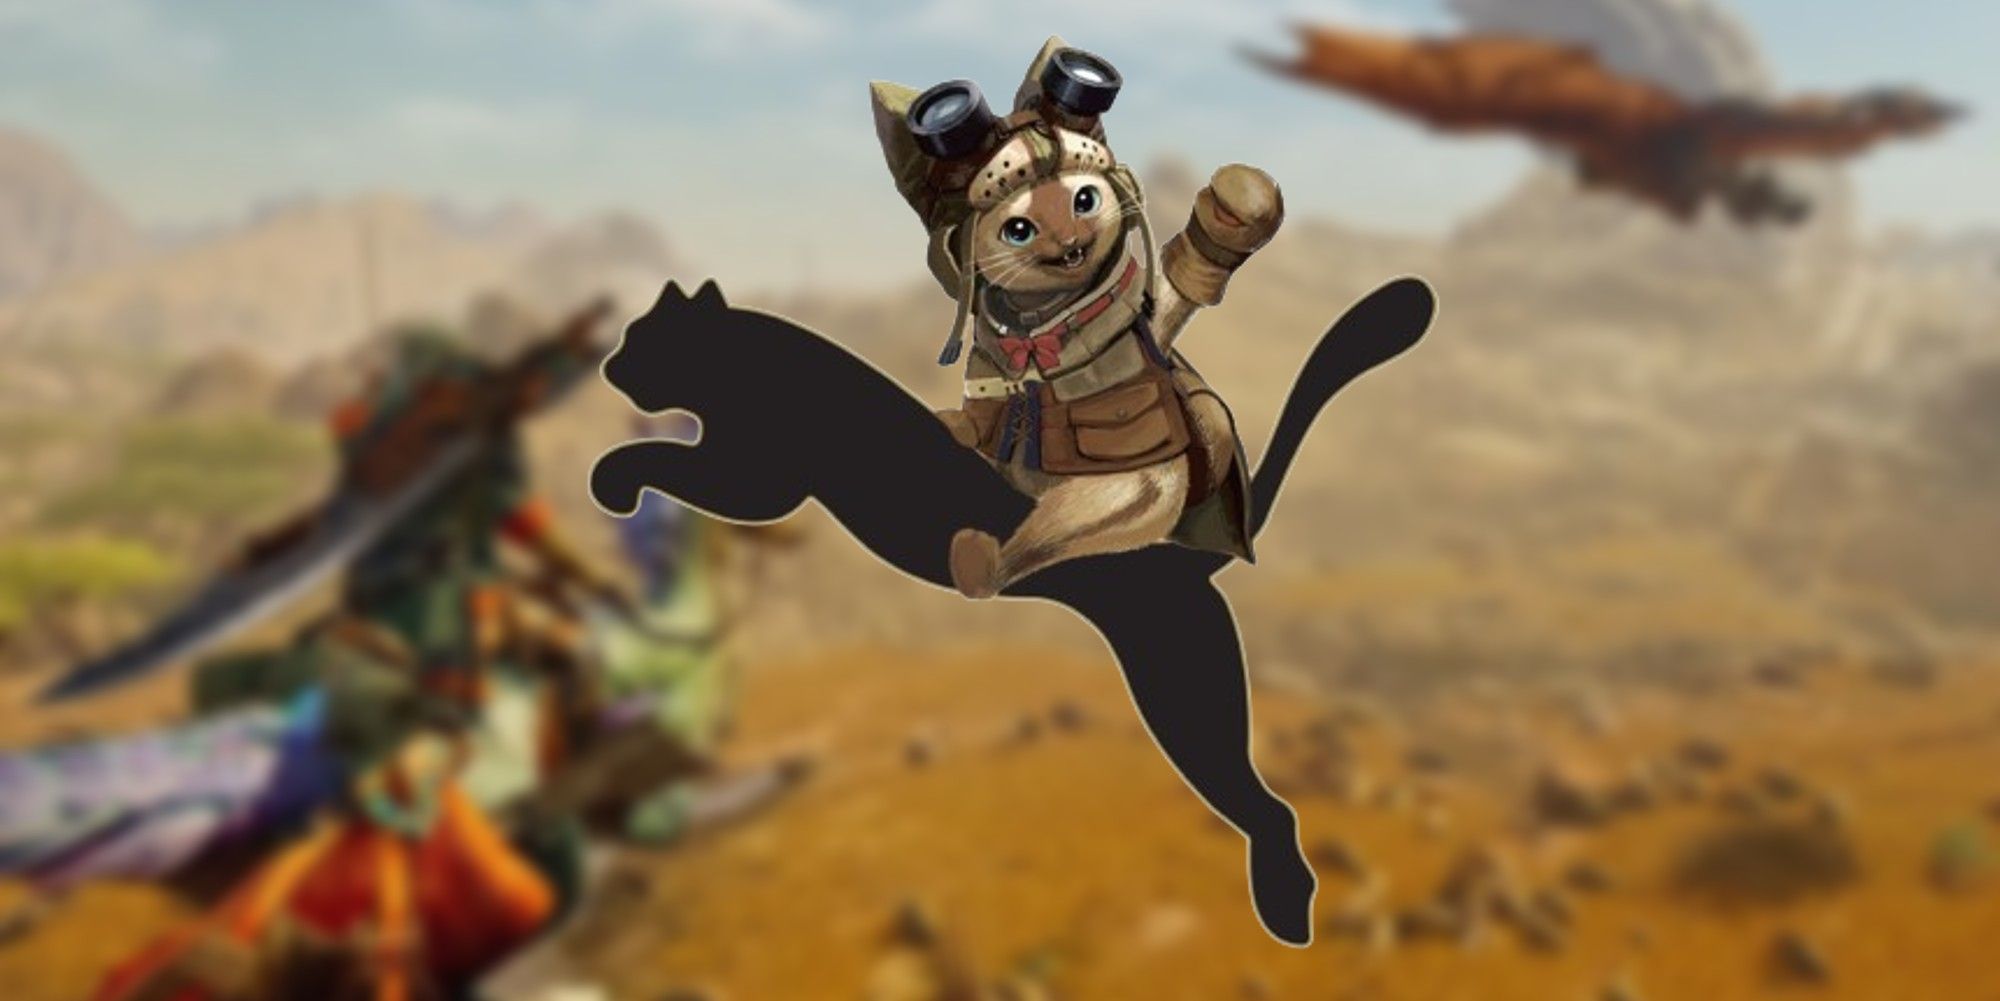 palico riding the puma logo on a monster hunter wilds background